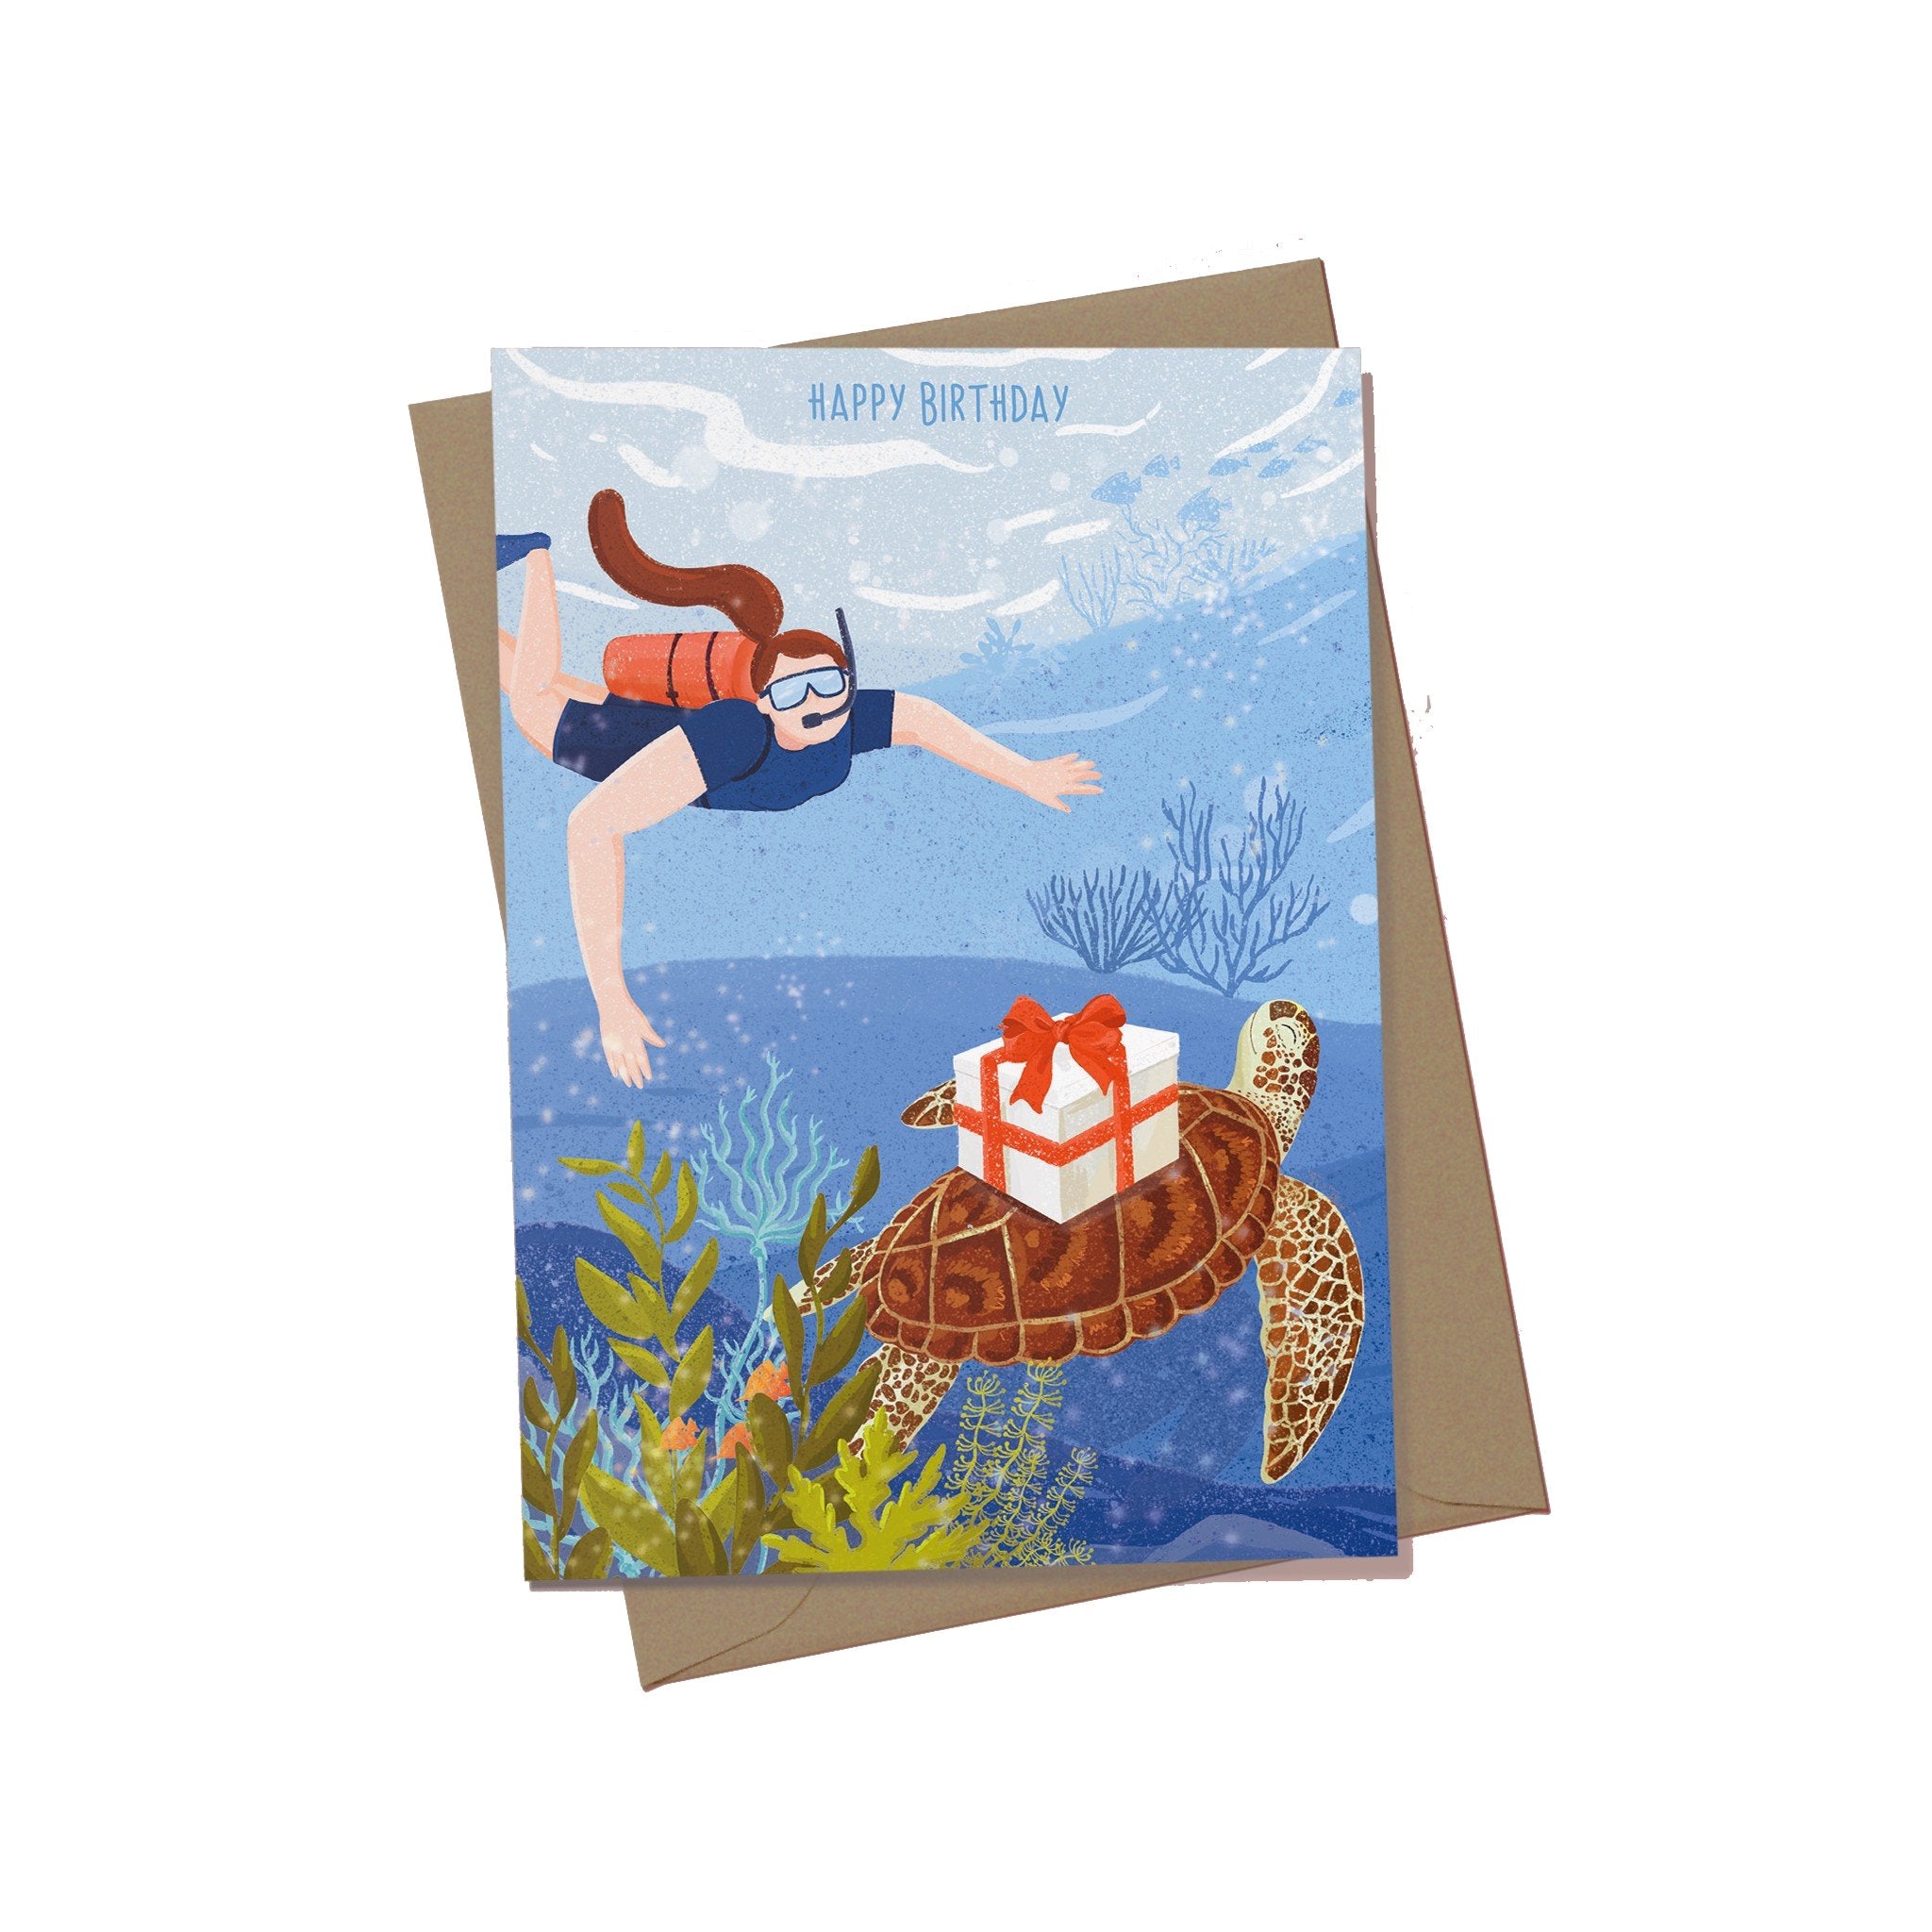 EJ MEMENTO Greeting Cards: Diving Into Birthday Surprises